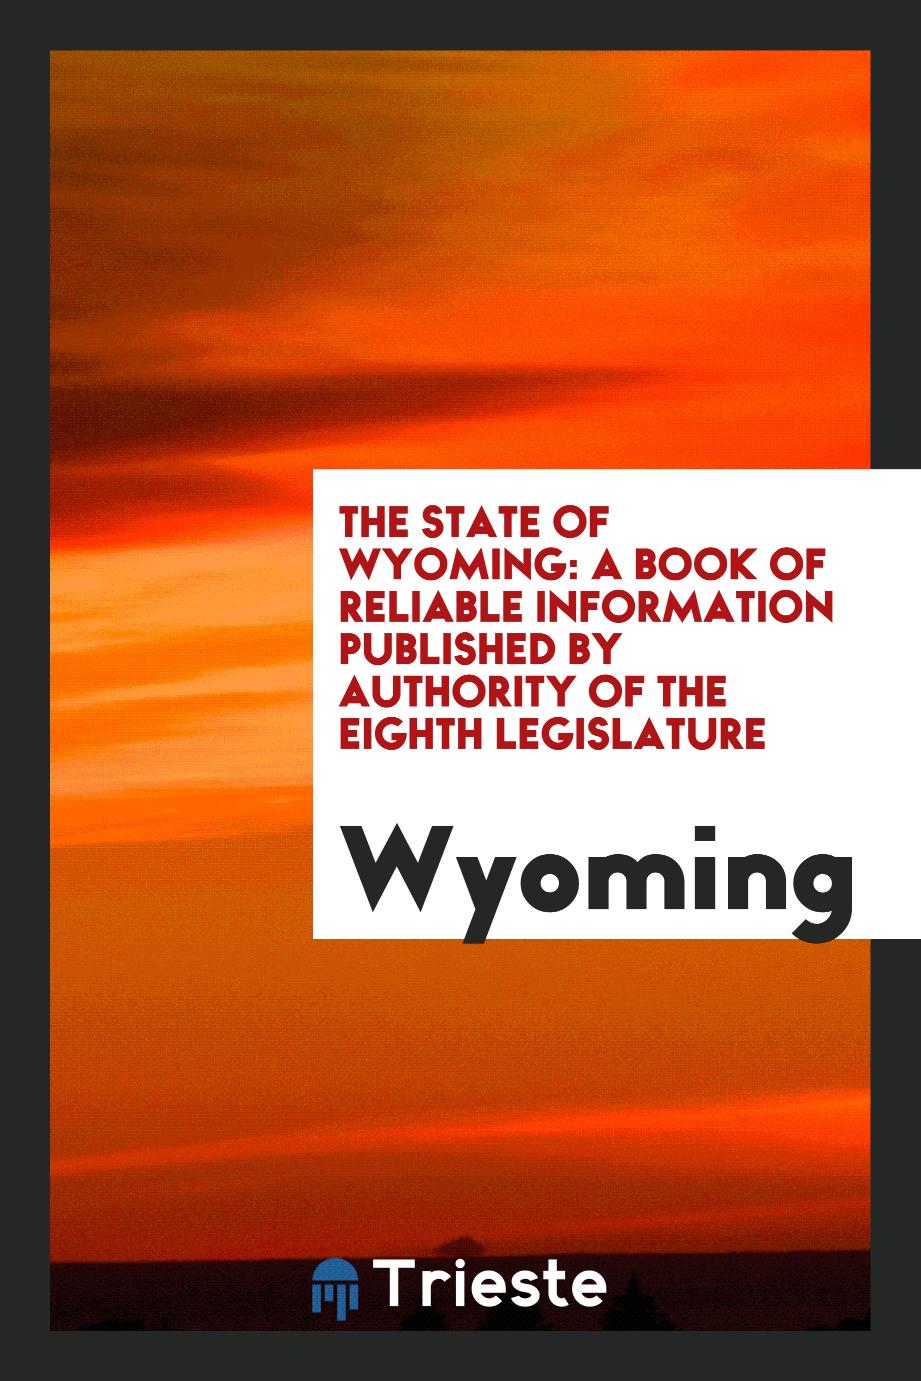 The State of Wyoming: a book of reliable information published by authority of the Eighth Legislature